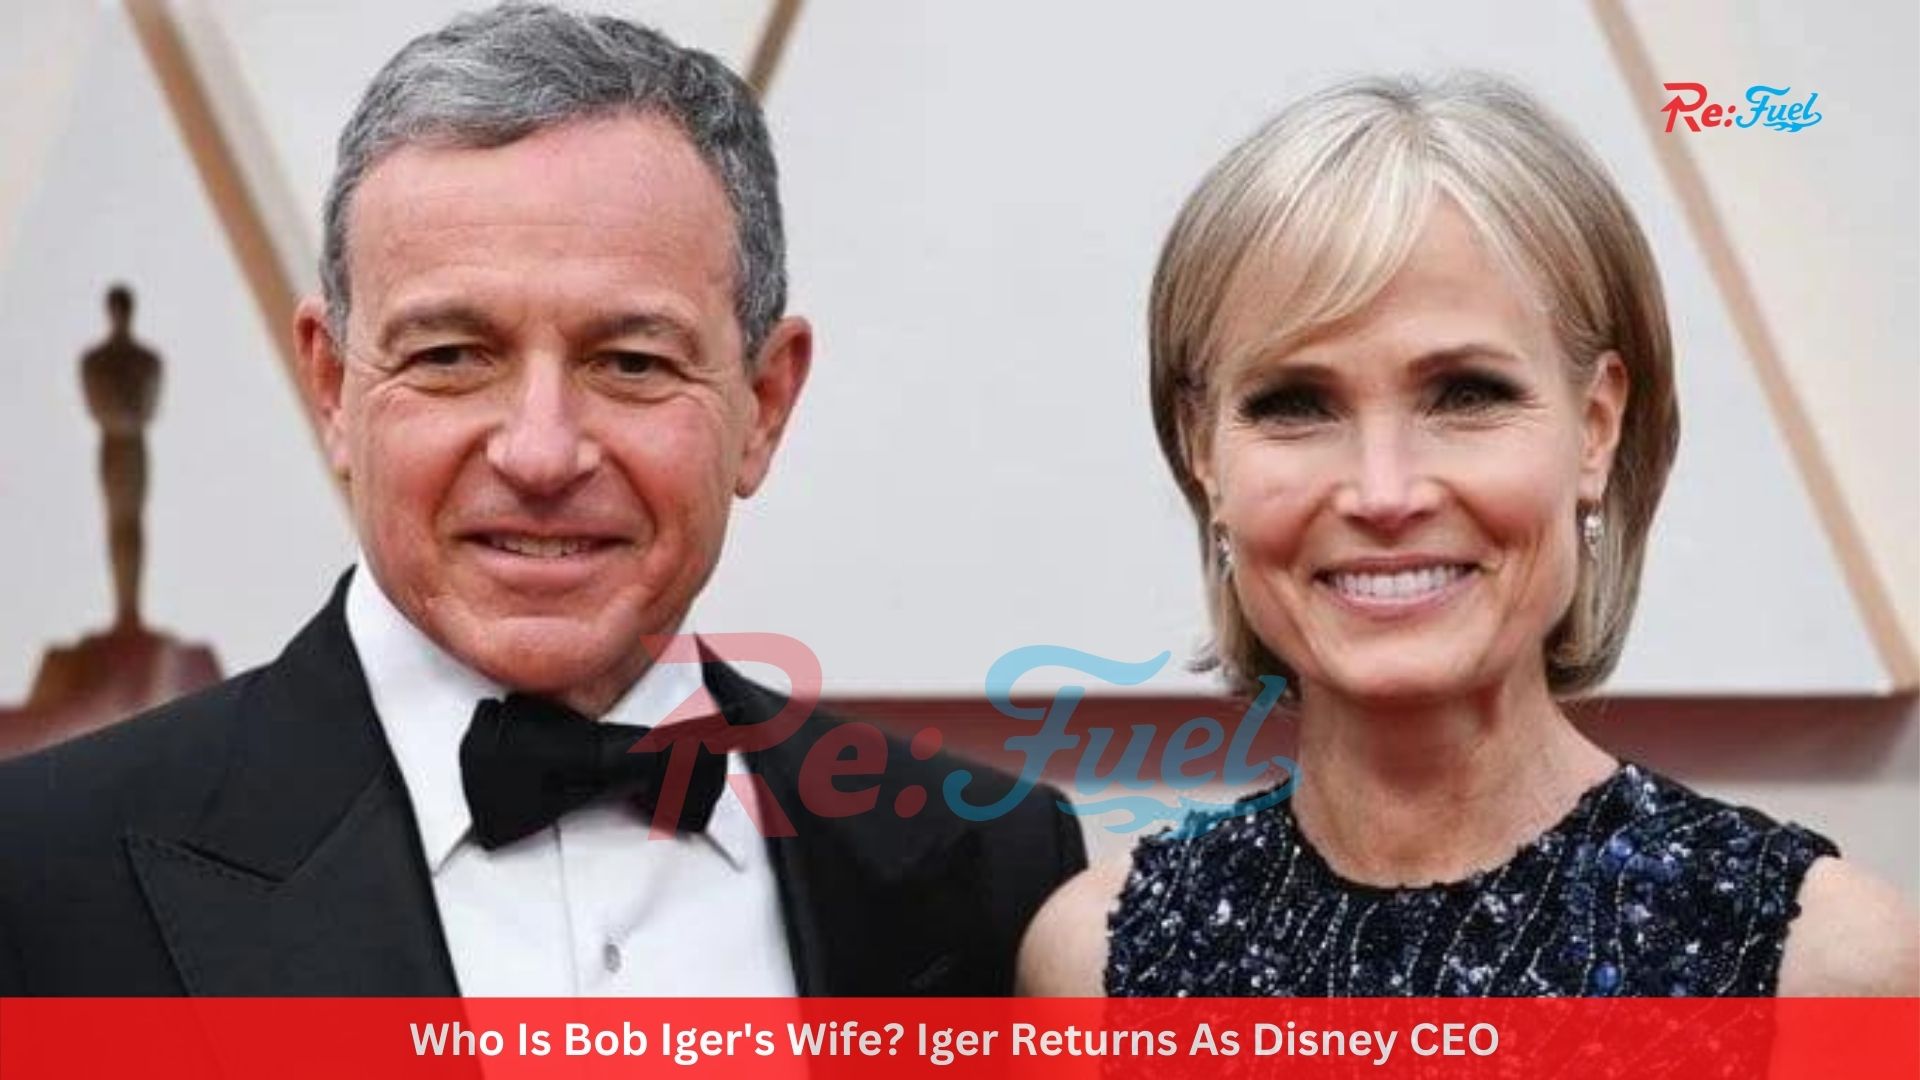 Who Is Bob Iger's Wife? Iger Returns As Disney CEO